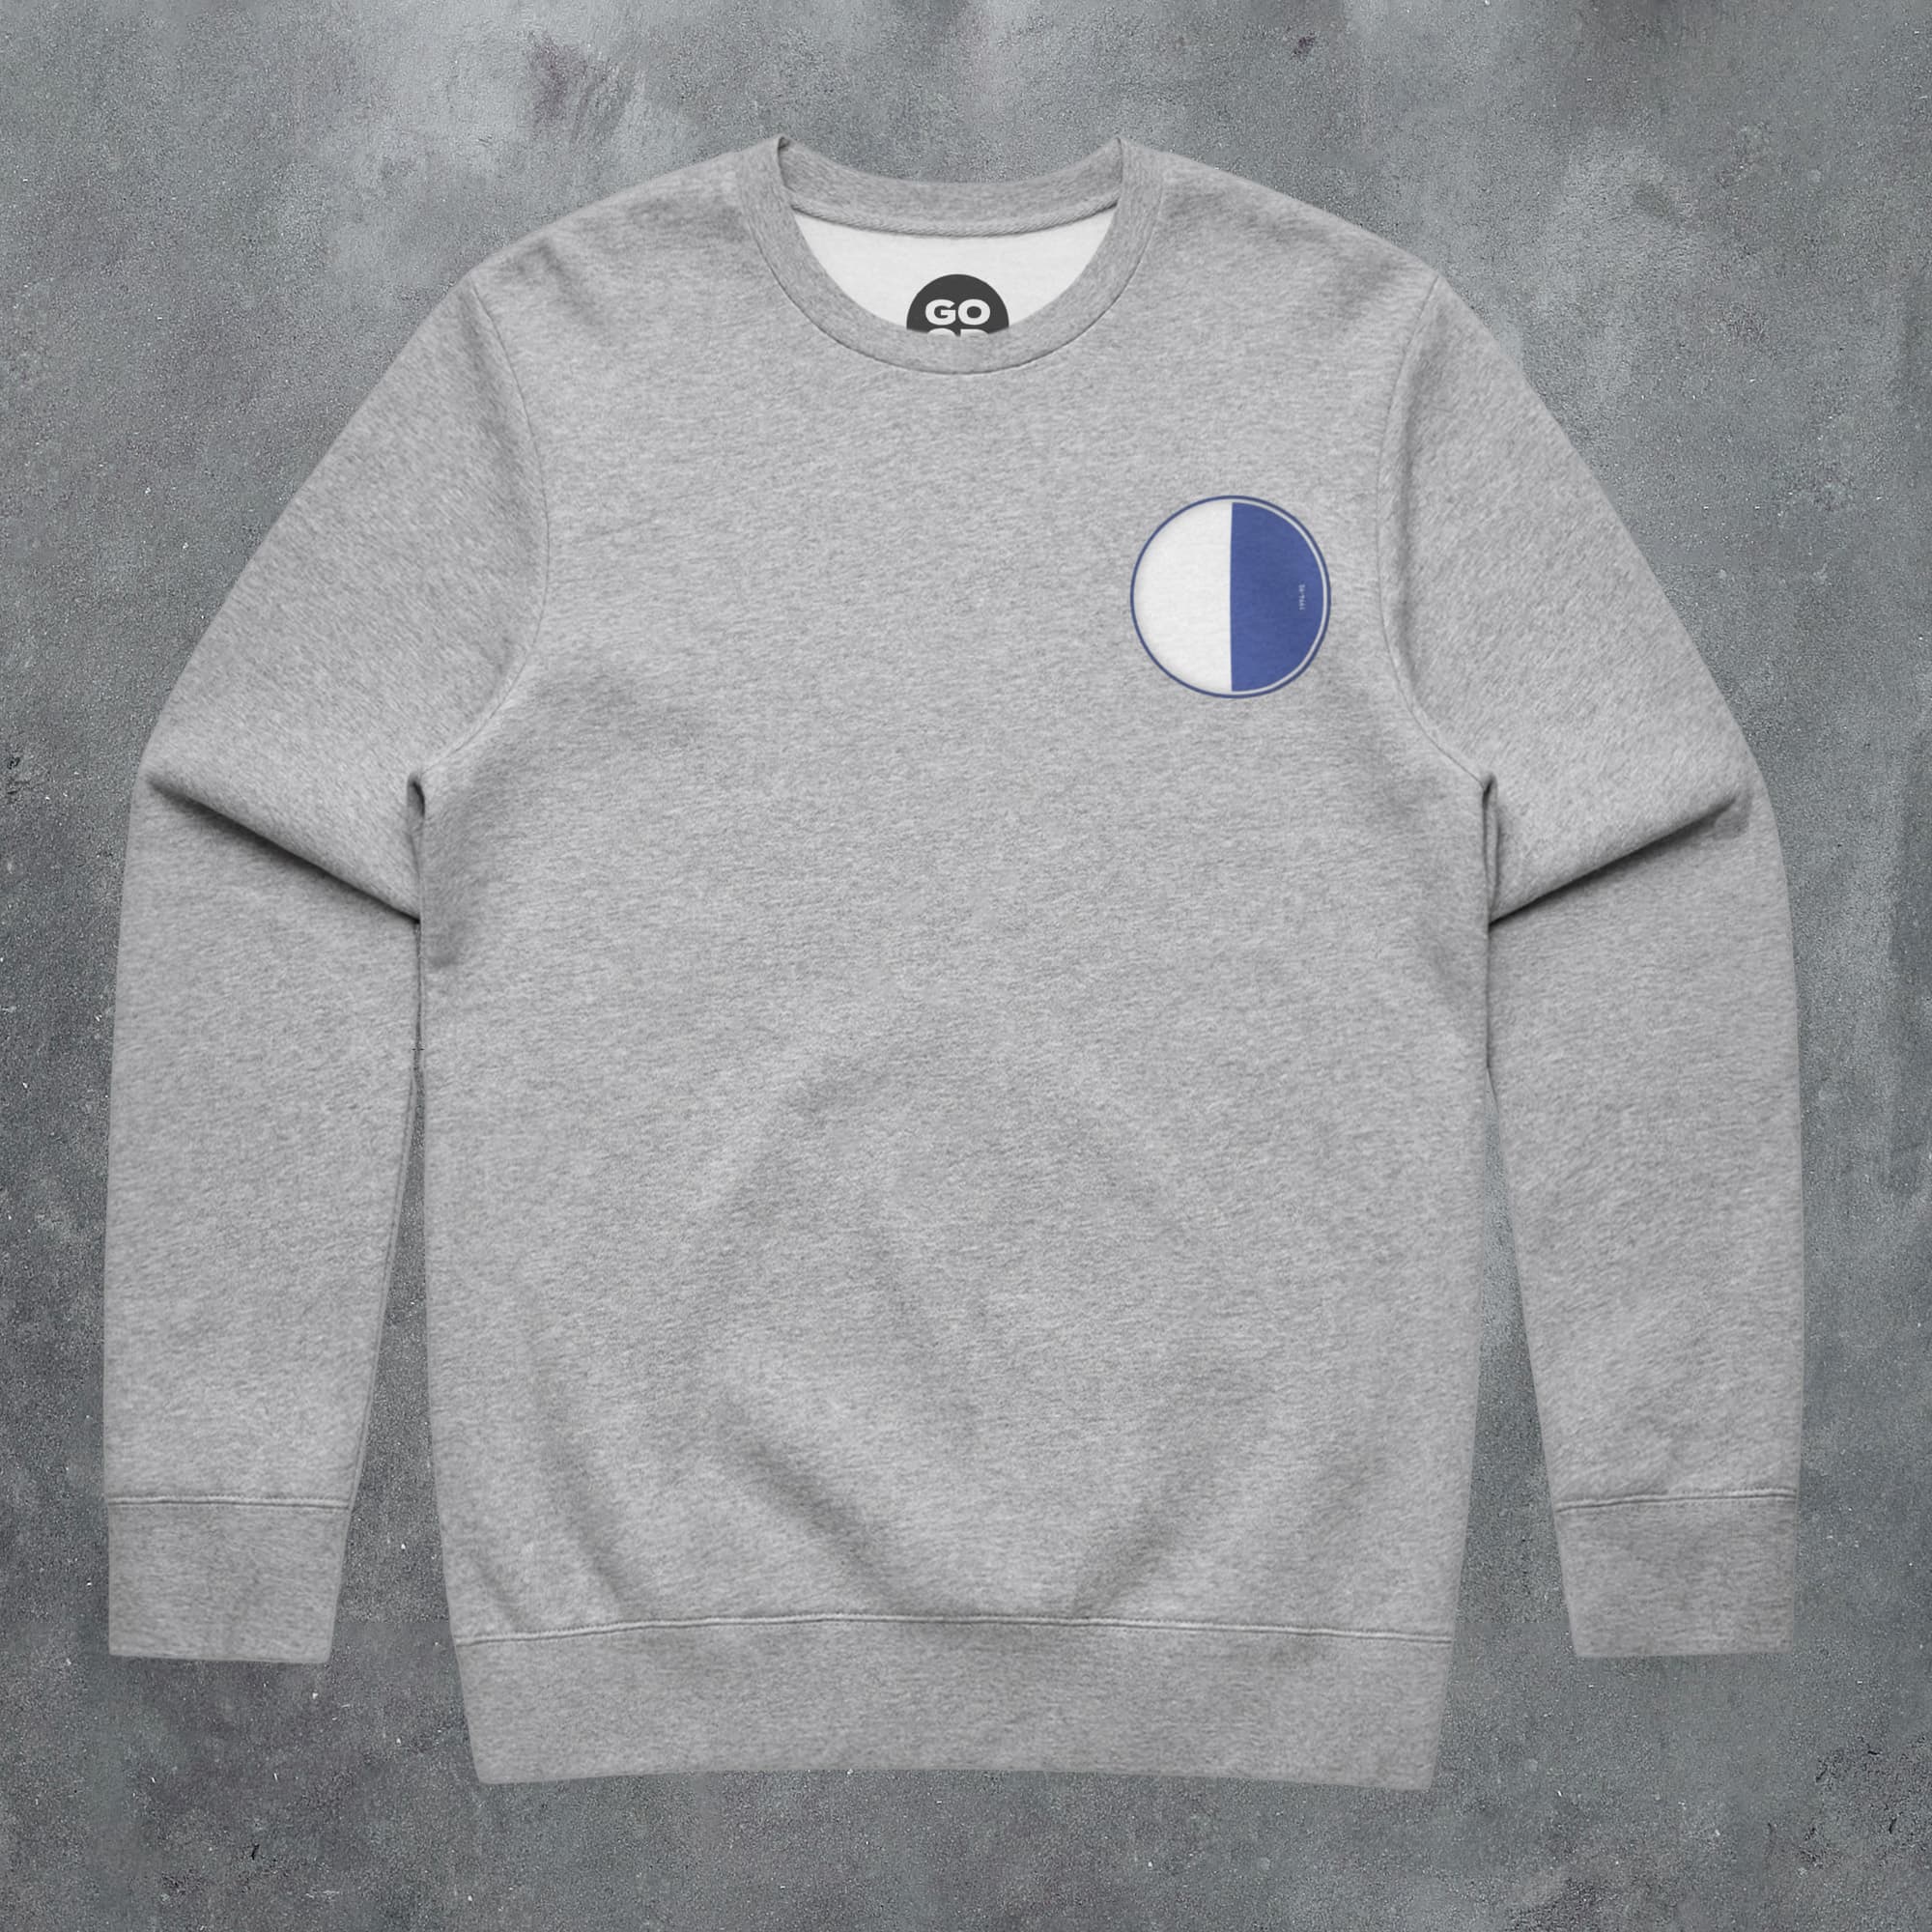 a grey sweatshirt with a blue and white circle on it